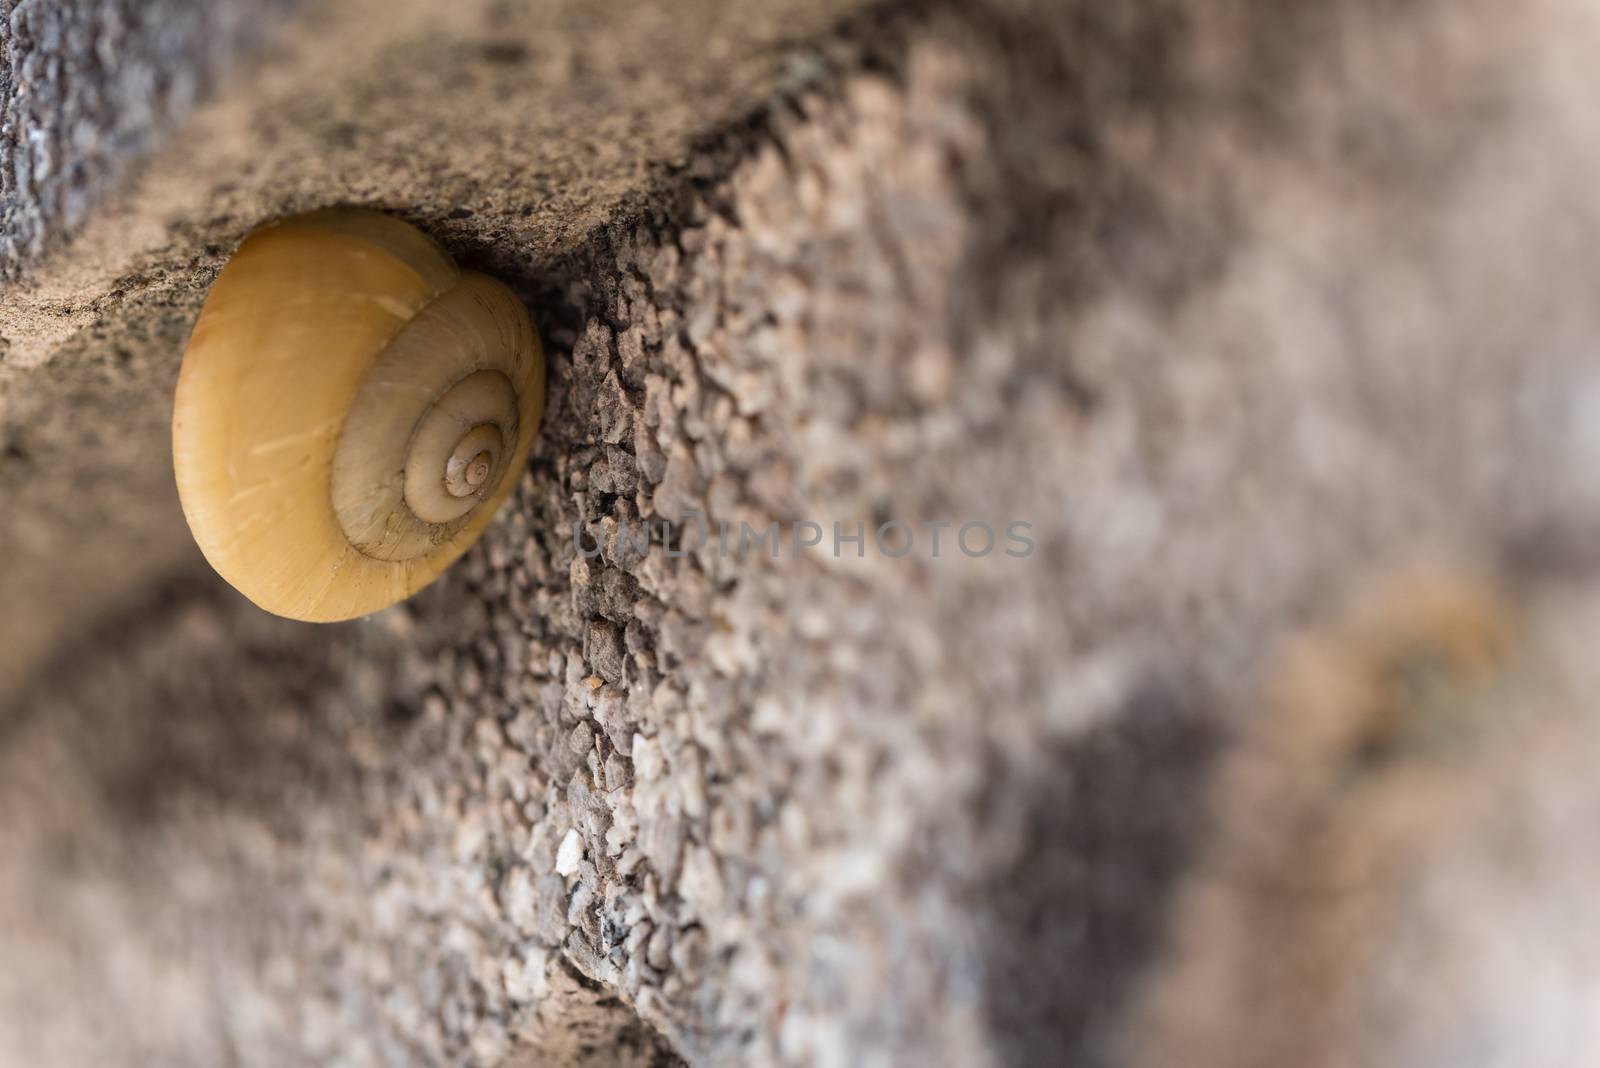 Snail on Stone Wall by justtscott